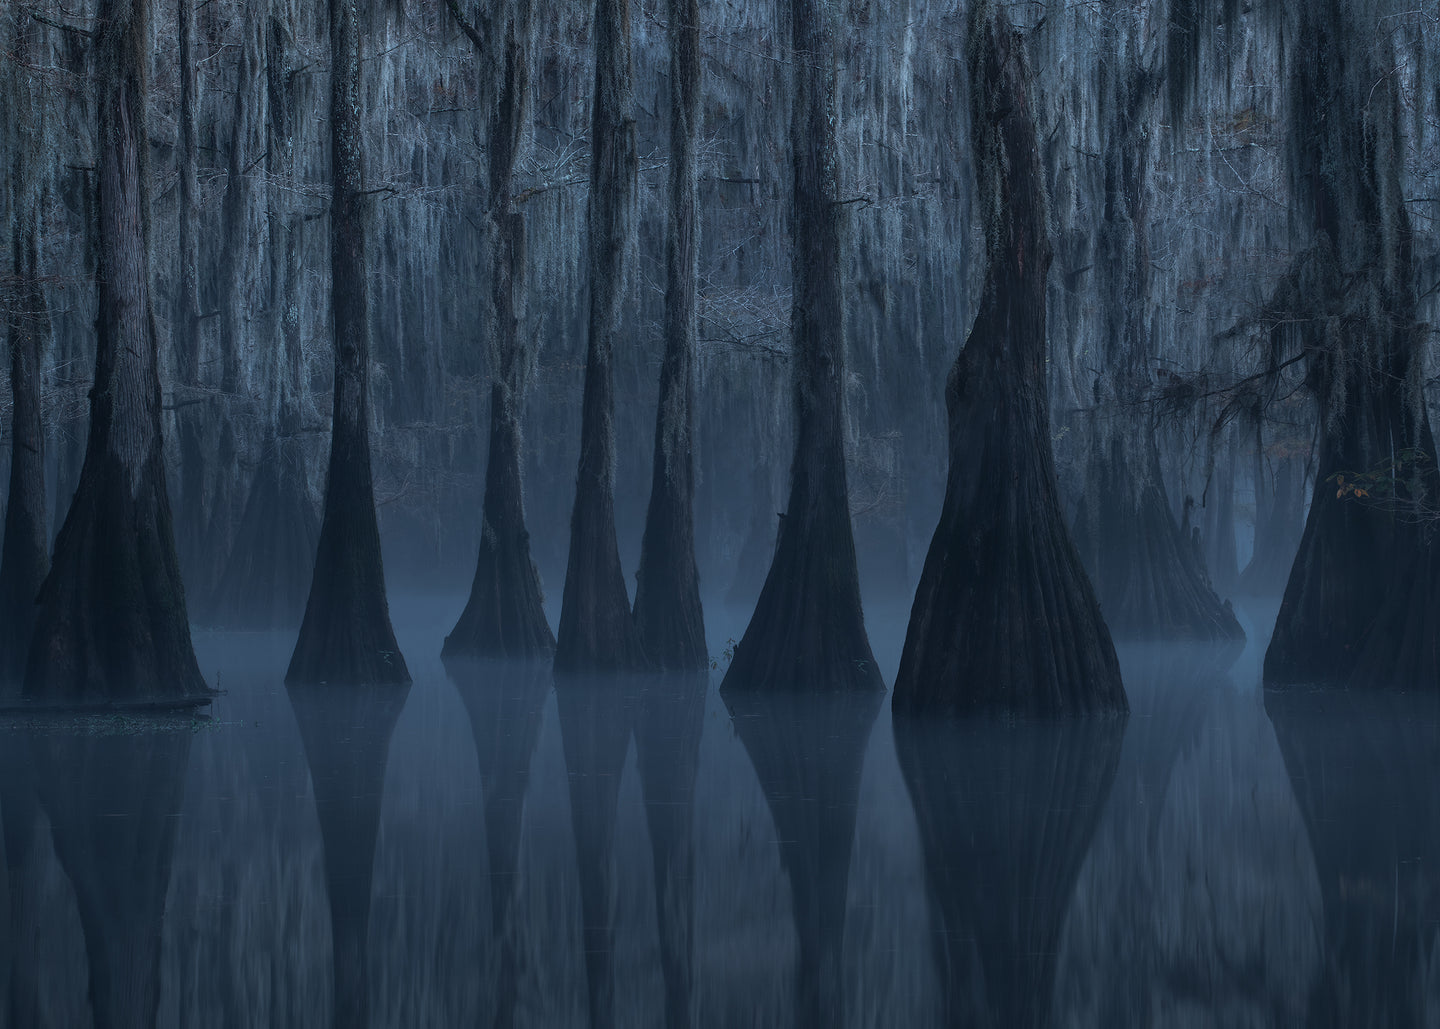 Ghosts in the Swamp